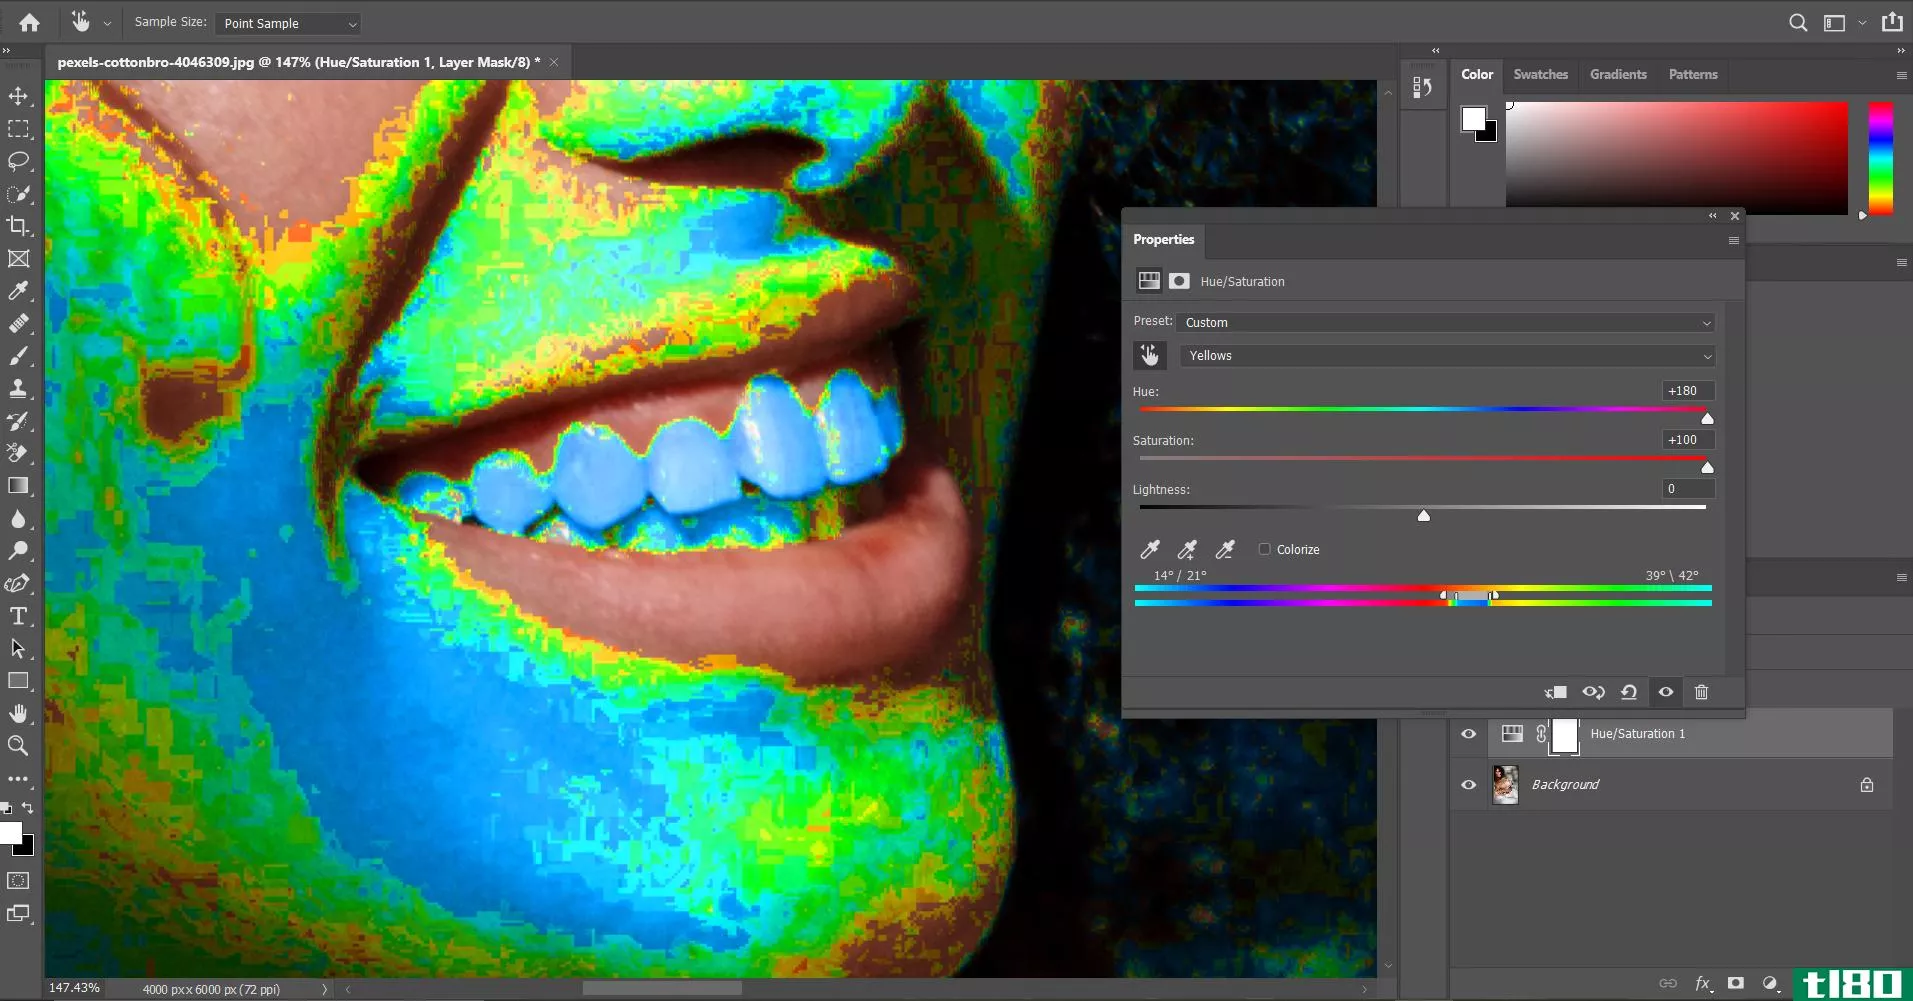 Changing hue and saturation of teeth